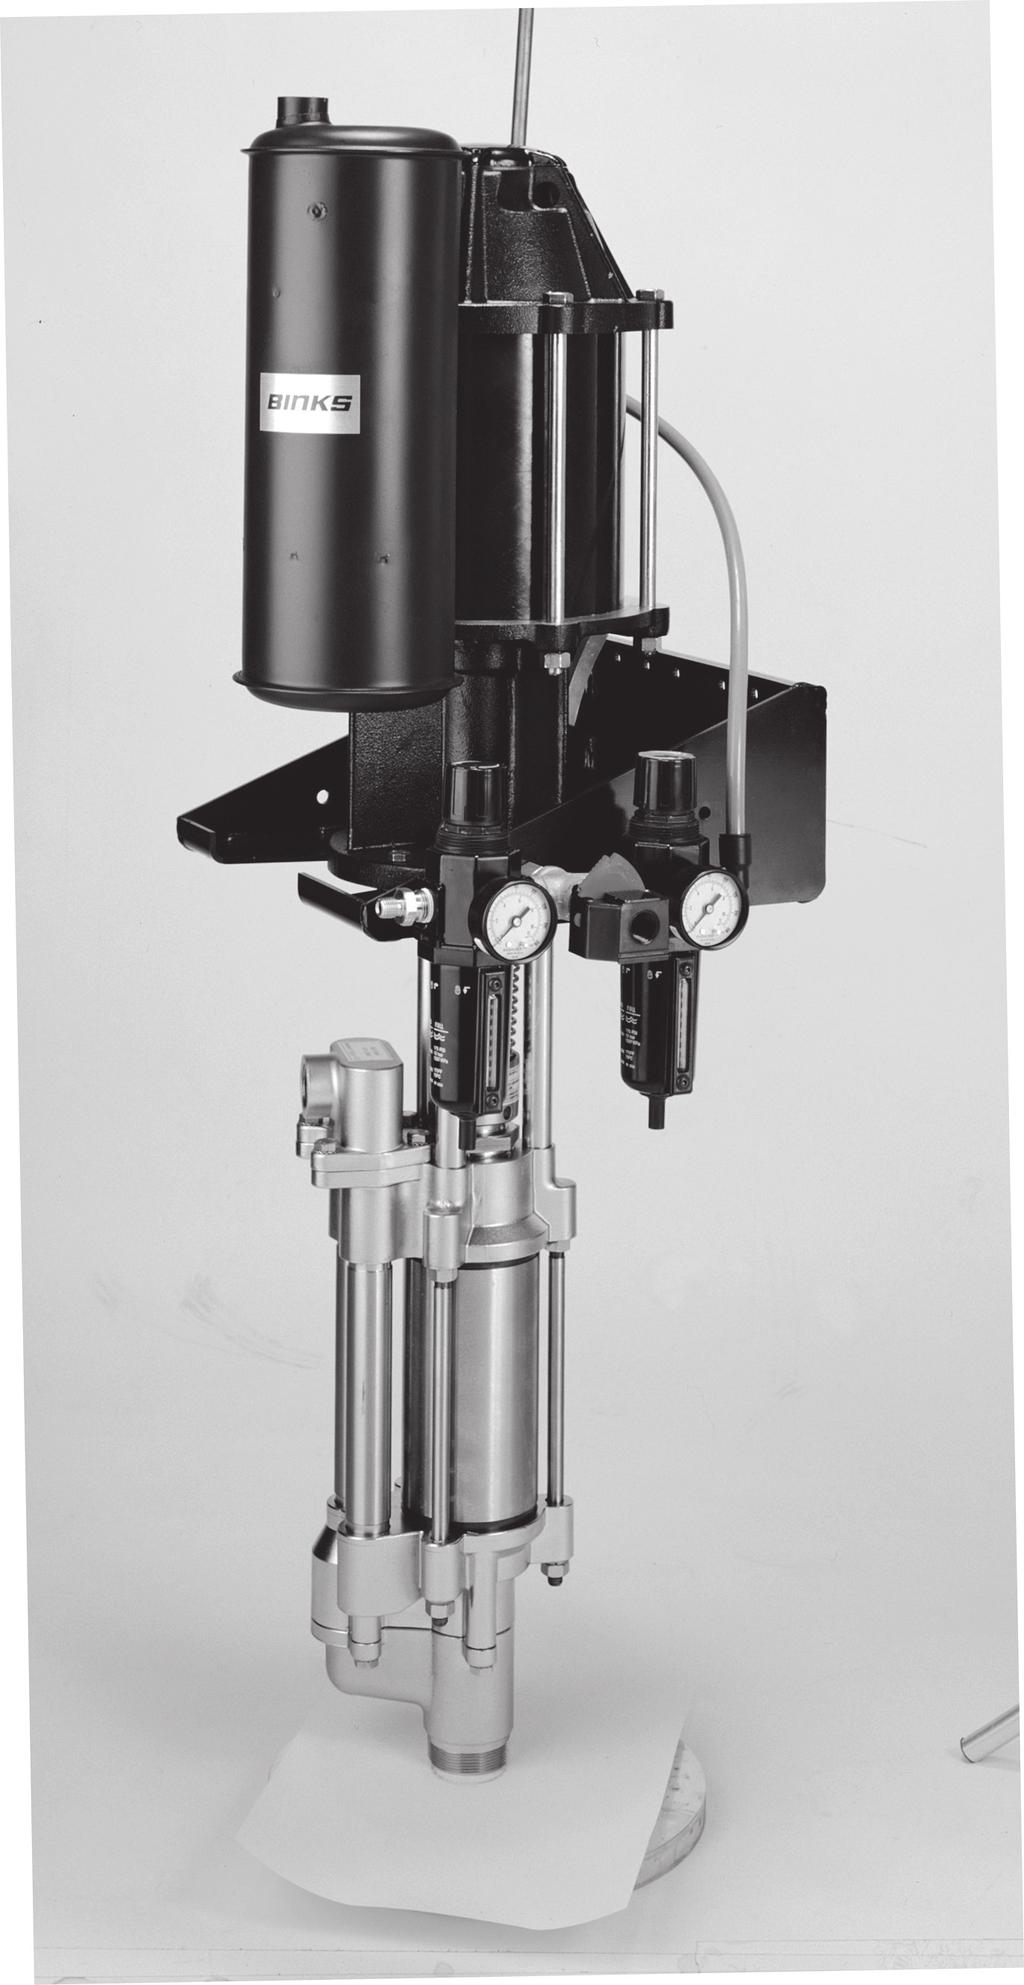 Infinity Four-Ball Pump Package The All-Stainless Pump Built to Take on the Toughest Applications Ceramic UltraCoat on Cylinder and Rod Package Includes Pump Wall Mount Bracket Muffler Air